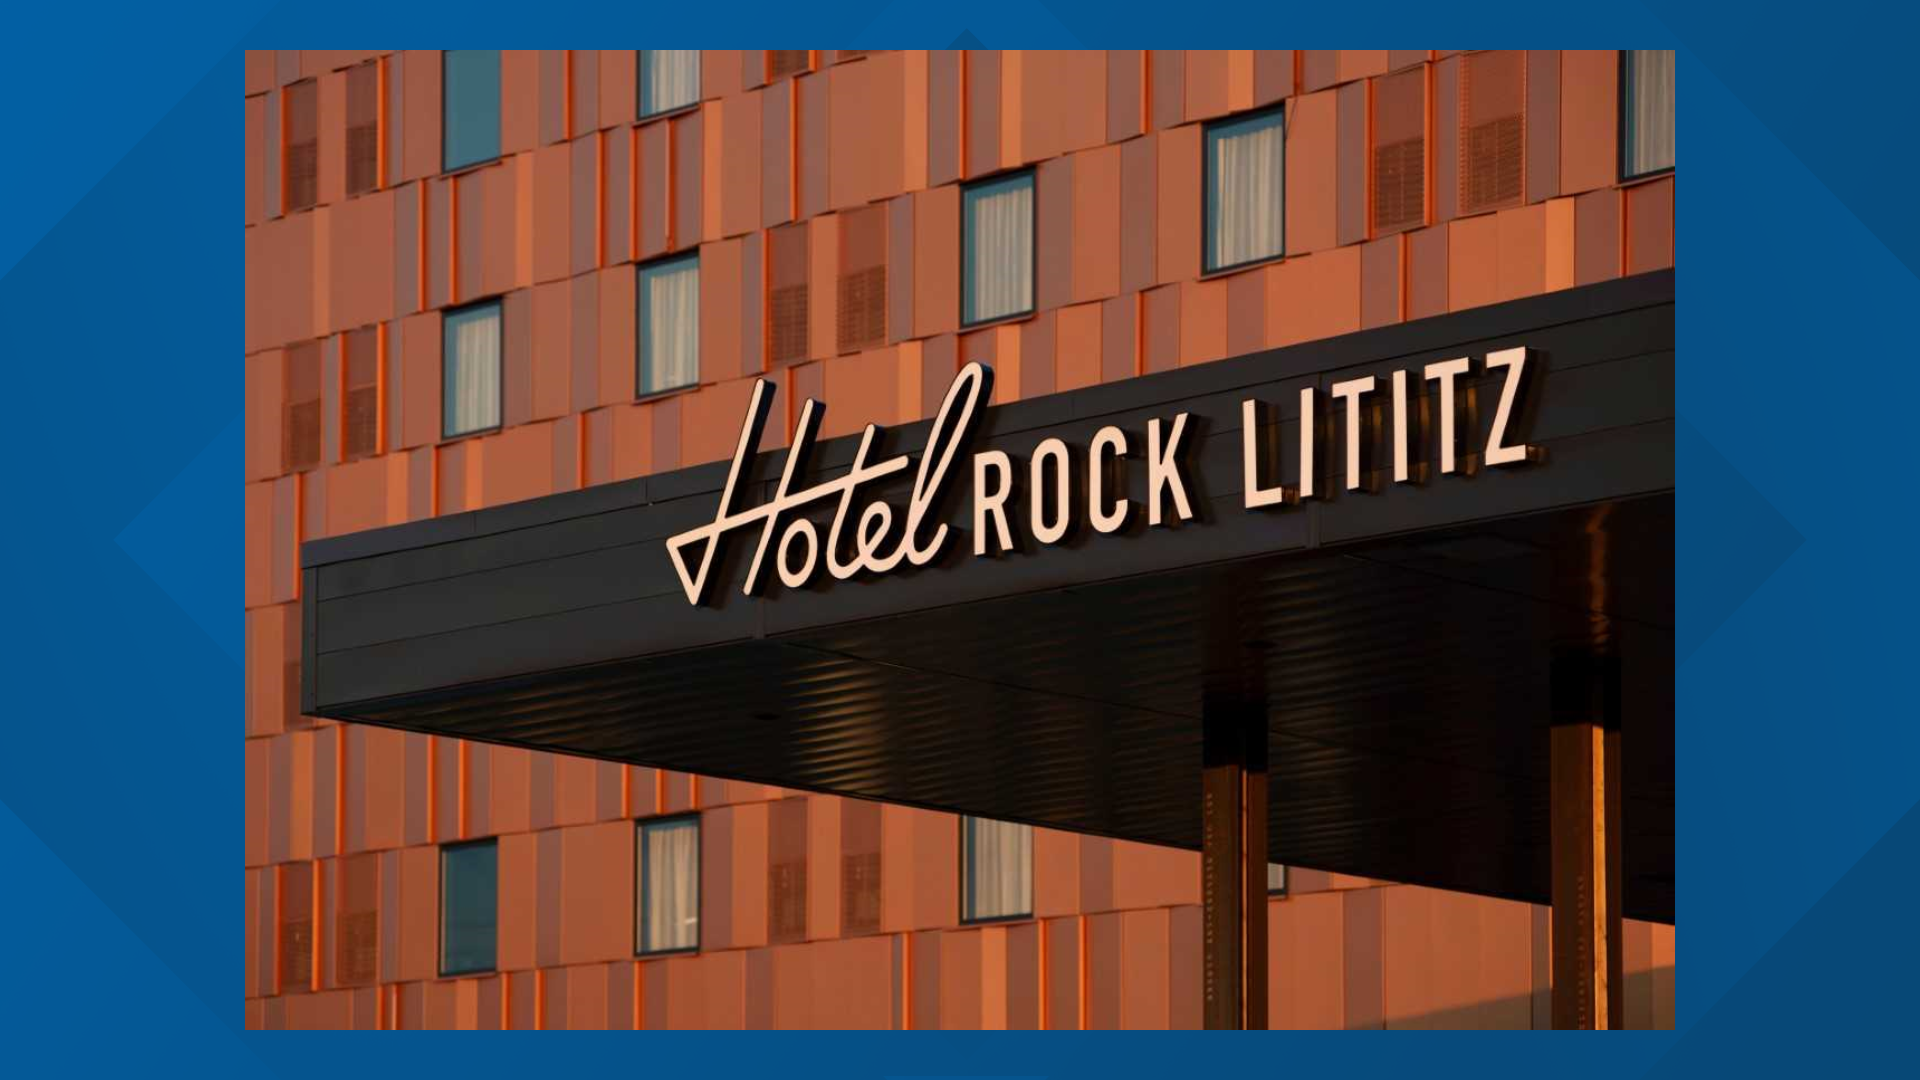 The Hotel Rock Lititz was just listed in the top ten percent of hotels world-wide in Tripadvisor’s Travelers’ Choice Awards for 2021.